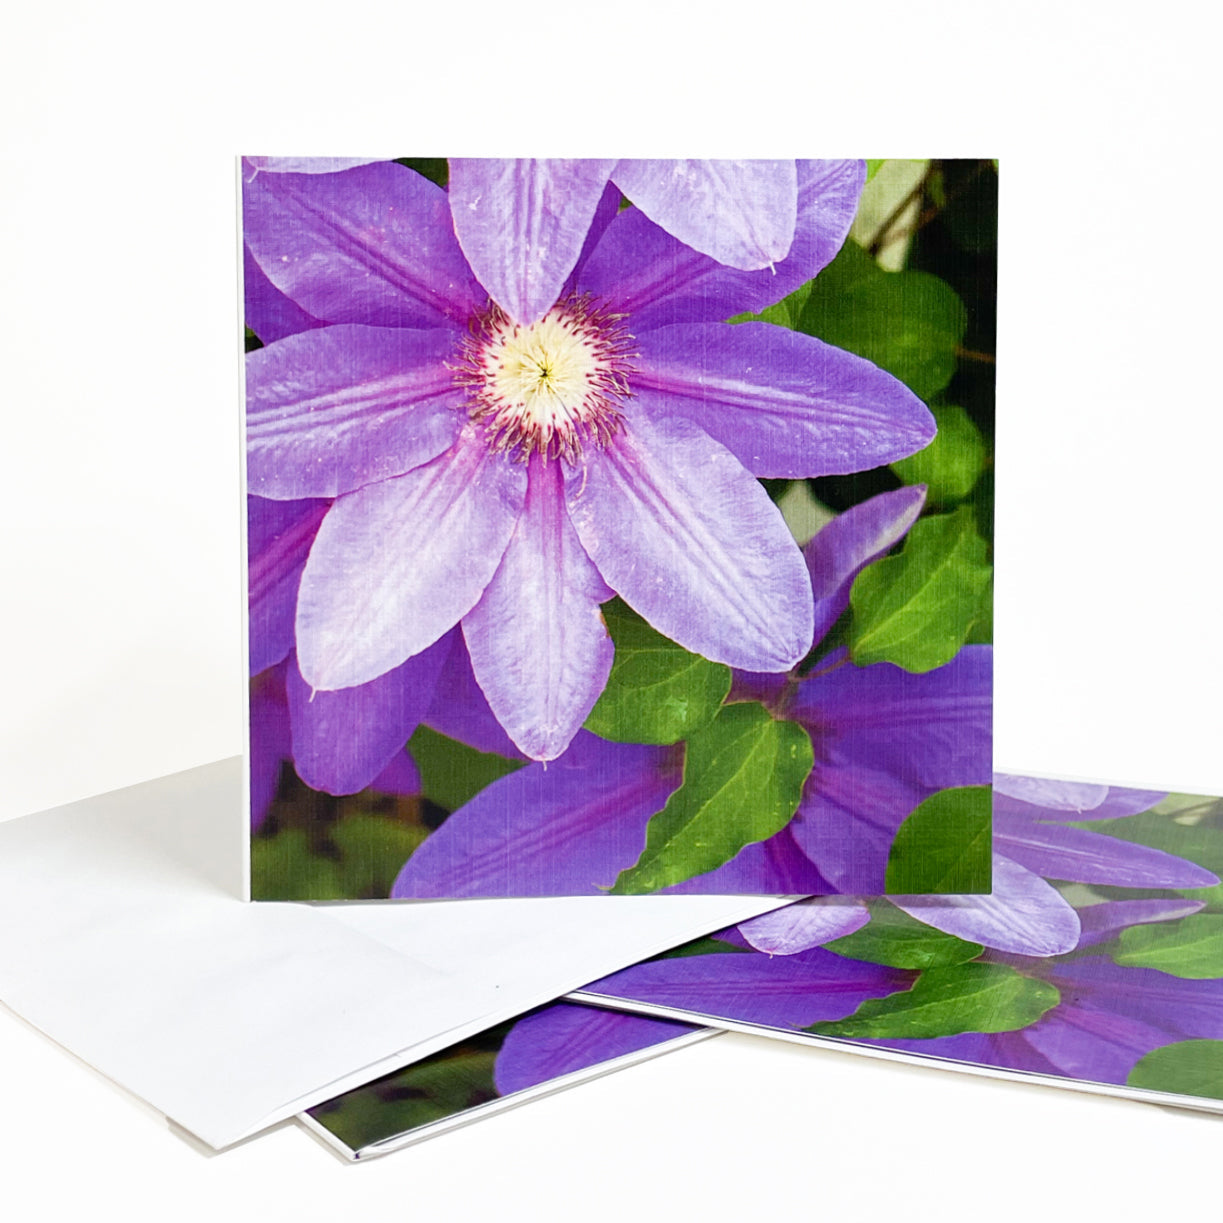 This purple clematis flower cleverly climbing on a garden trellis has the star power to stop passersby in their tracks.  Open the casually elegant card to discover more of the flowers blooming brightly on Mackinac Island.  Clematis symbolize mental beauty. Photography by Jennifer Wohletz.  The card is meant to be shared or displayed as a work of art.